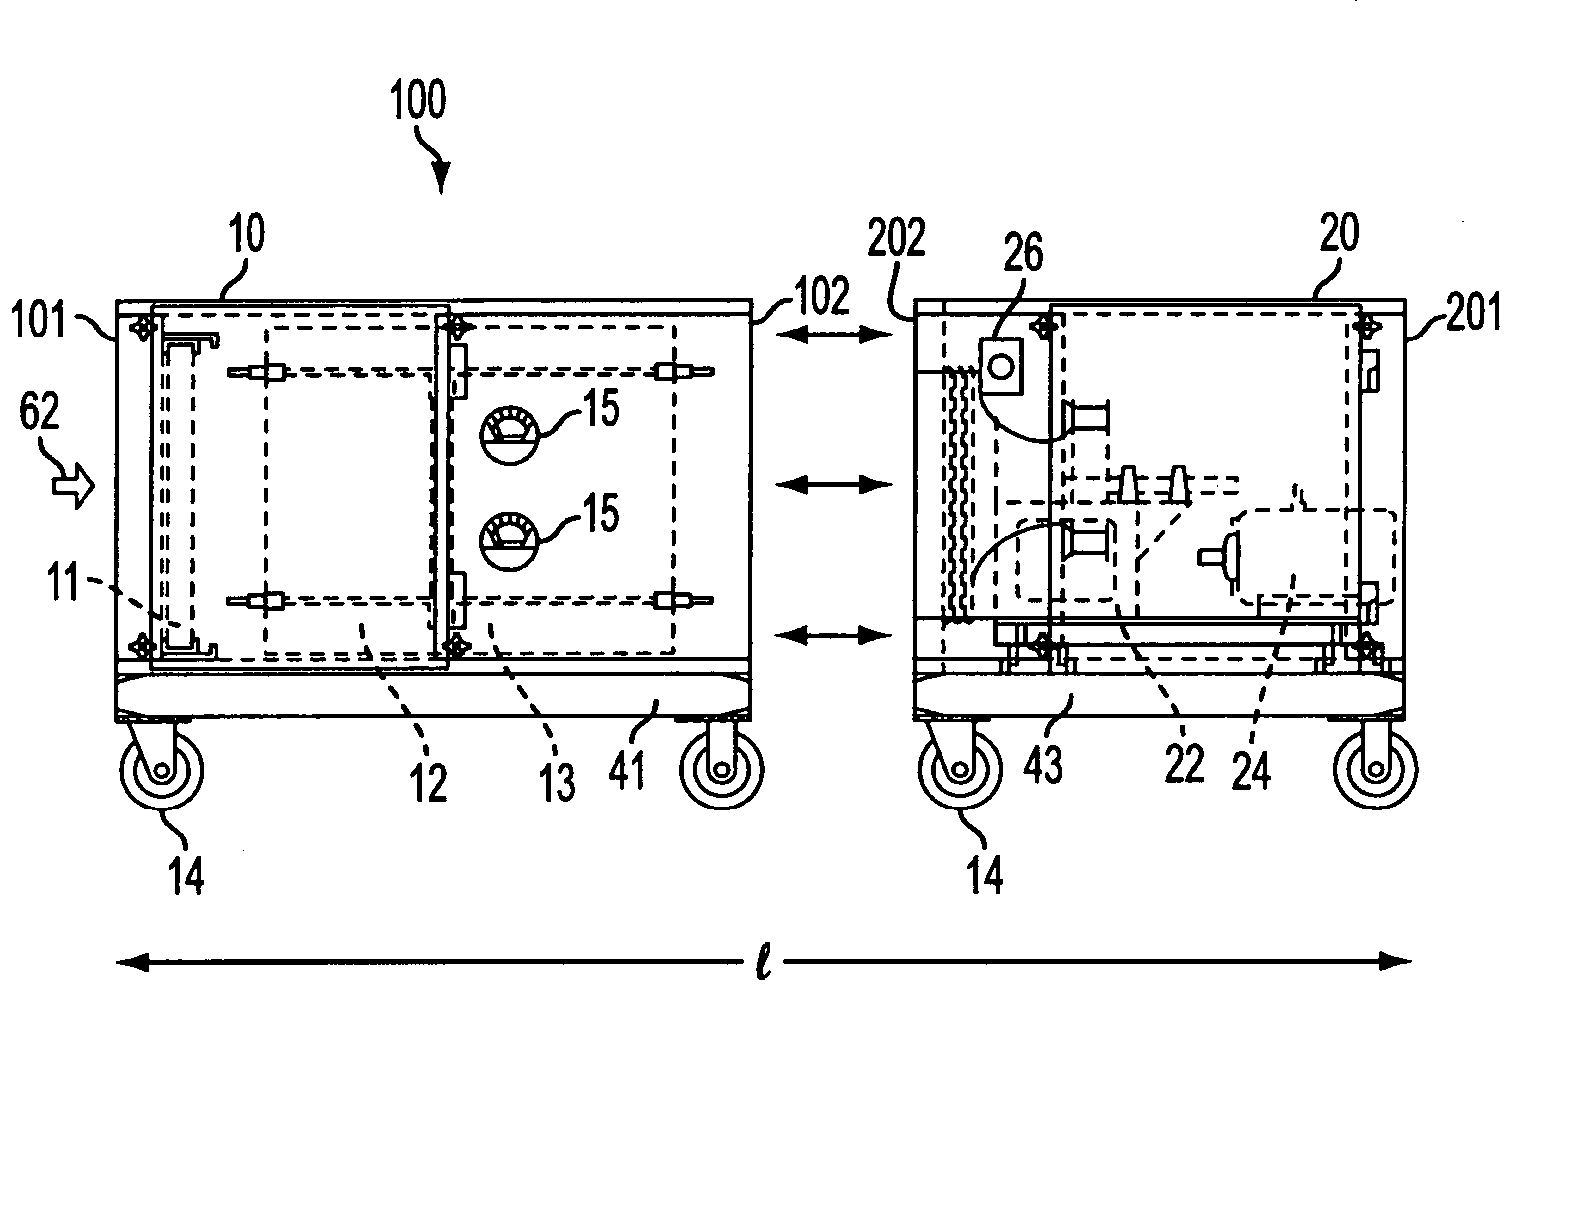 Portable filter unit and methods for using same